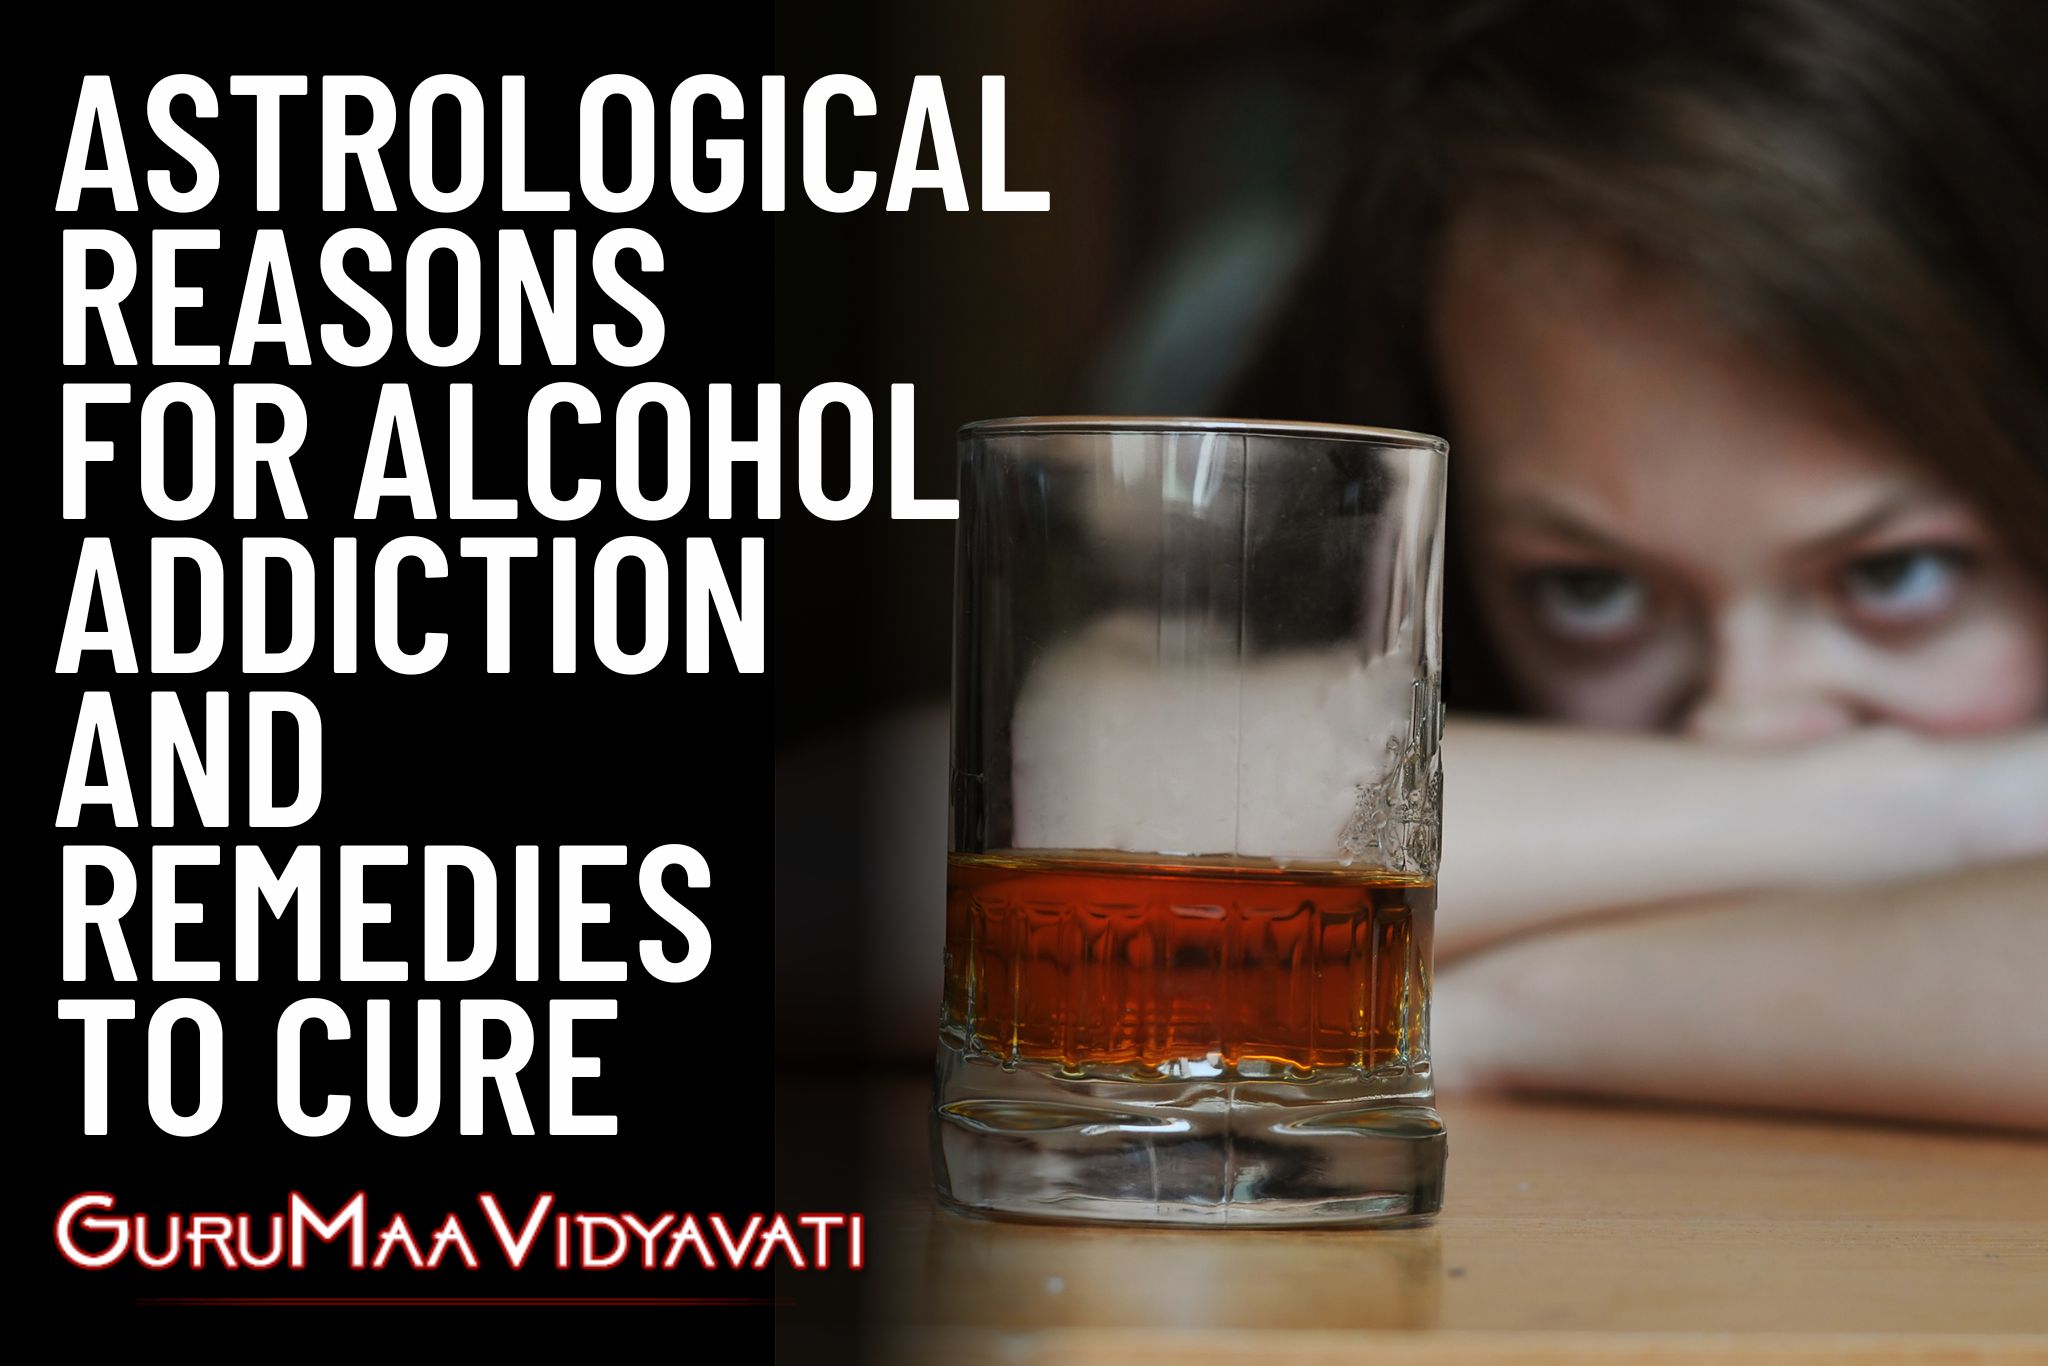 Astrological Reasons for Alcohol Addiction and Remedies to Cure Alcohol Addiction